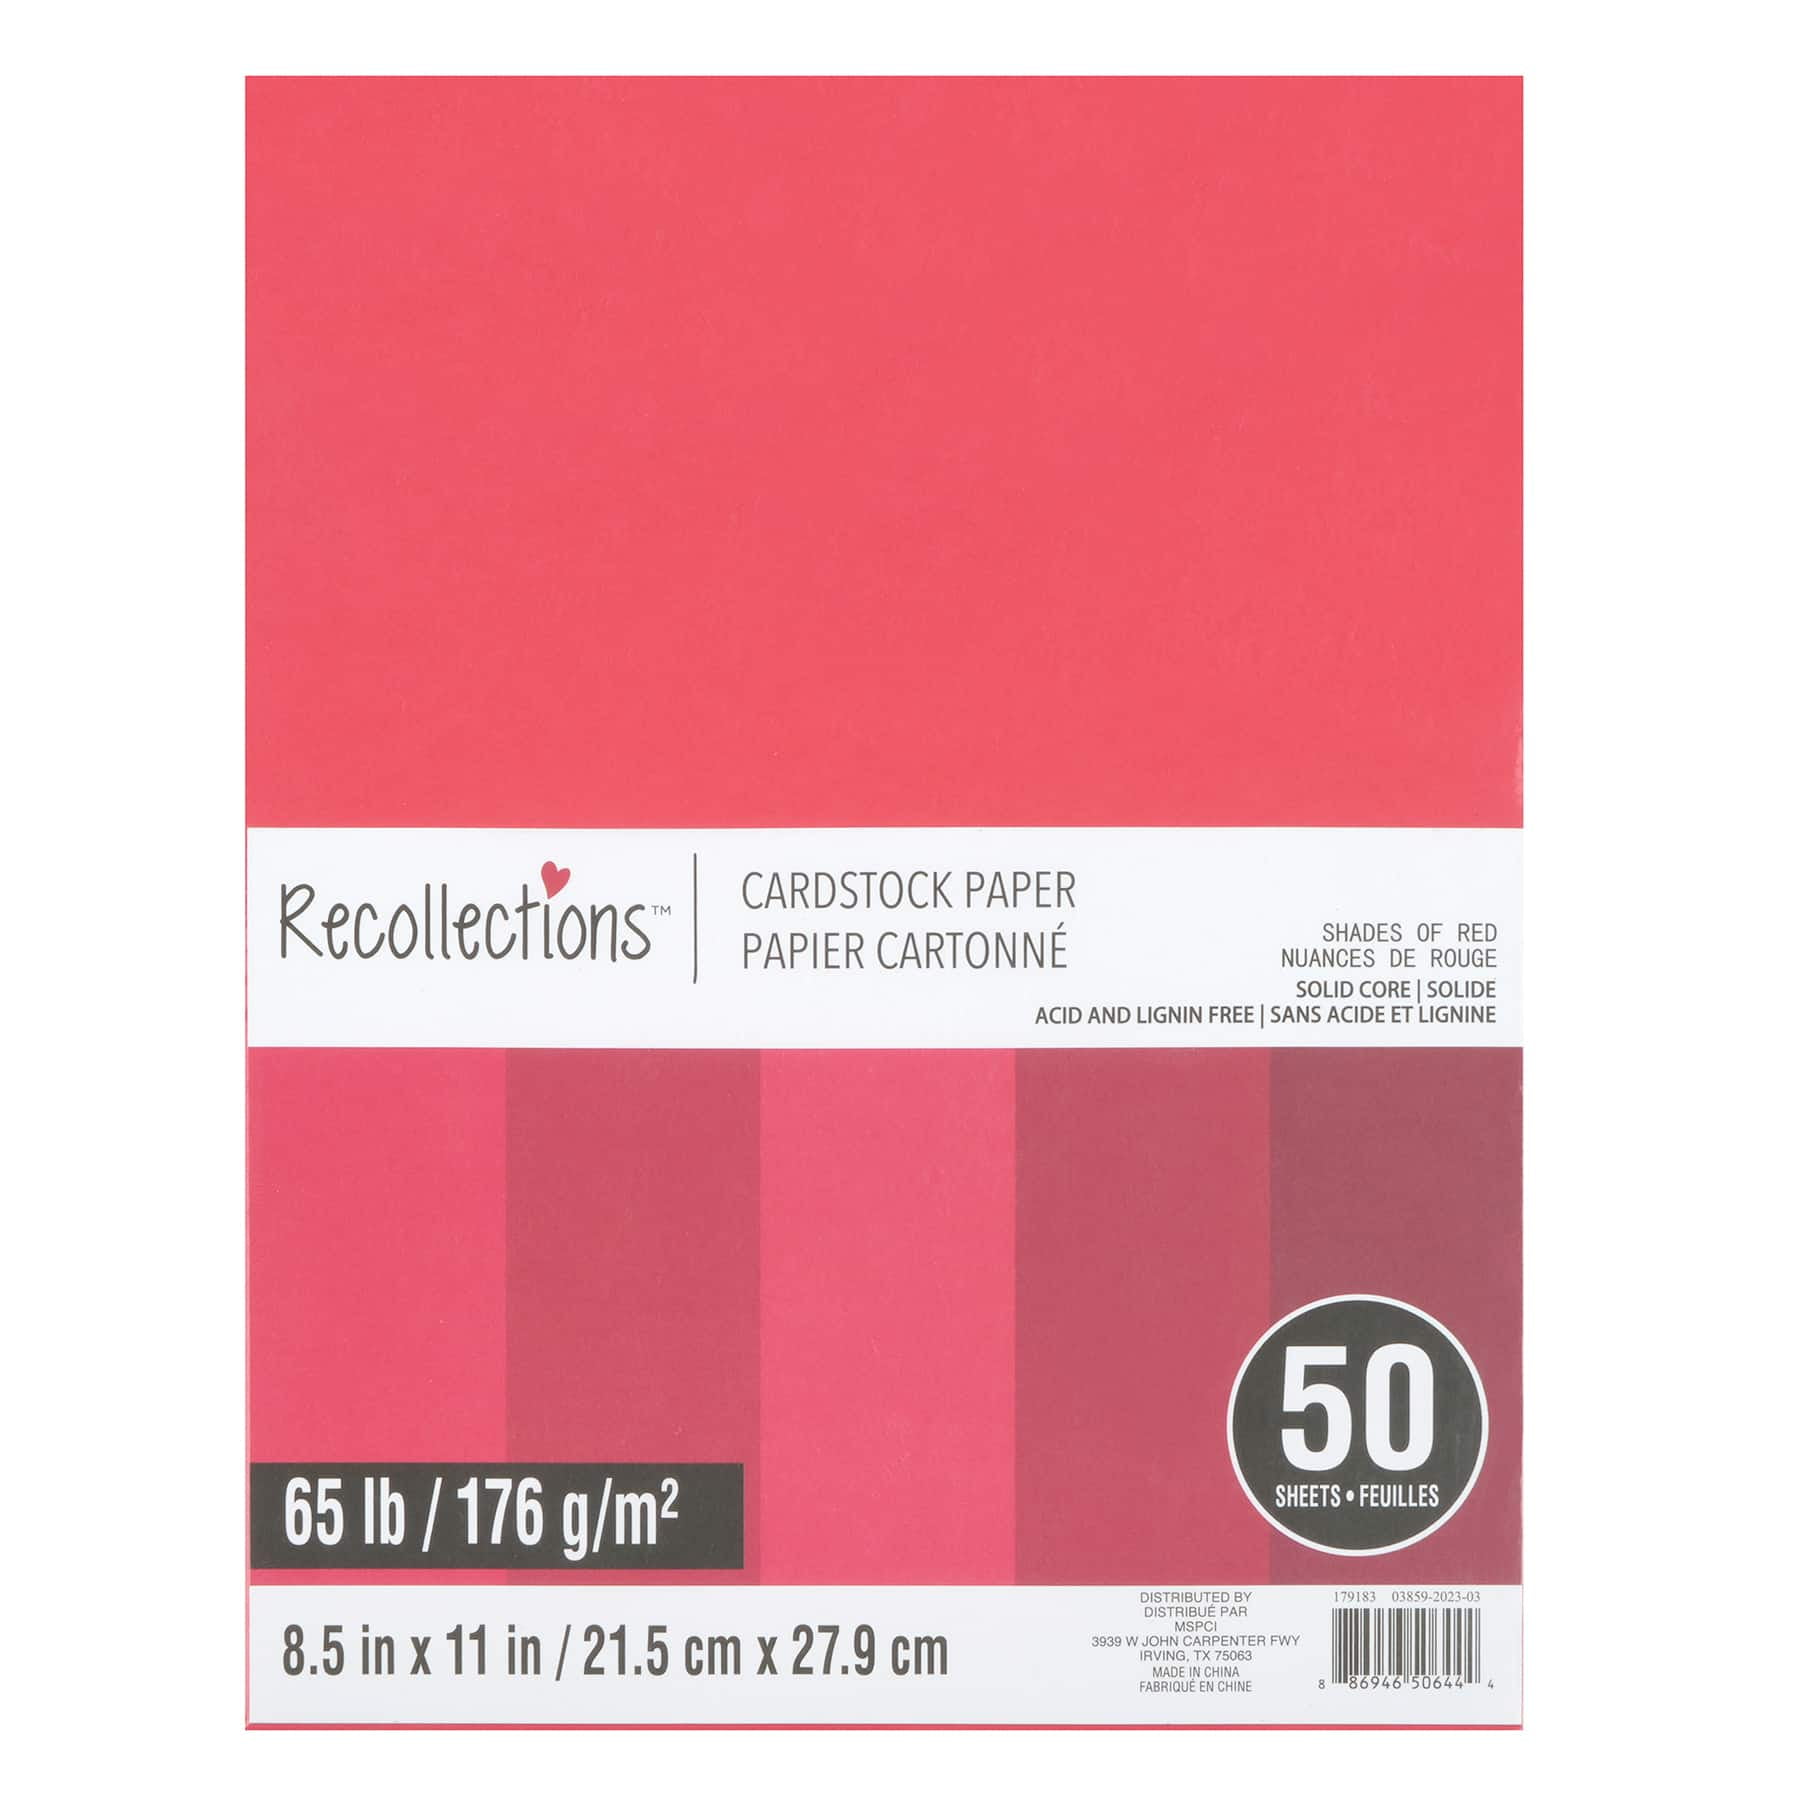 Michaels Bulk 12 Packs: 50 Ct. (600 Total) 9 inch x 12 inch Construction Paper by Creatology, Size: 9 x 12, White